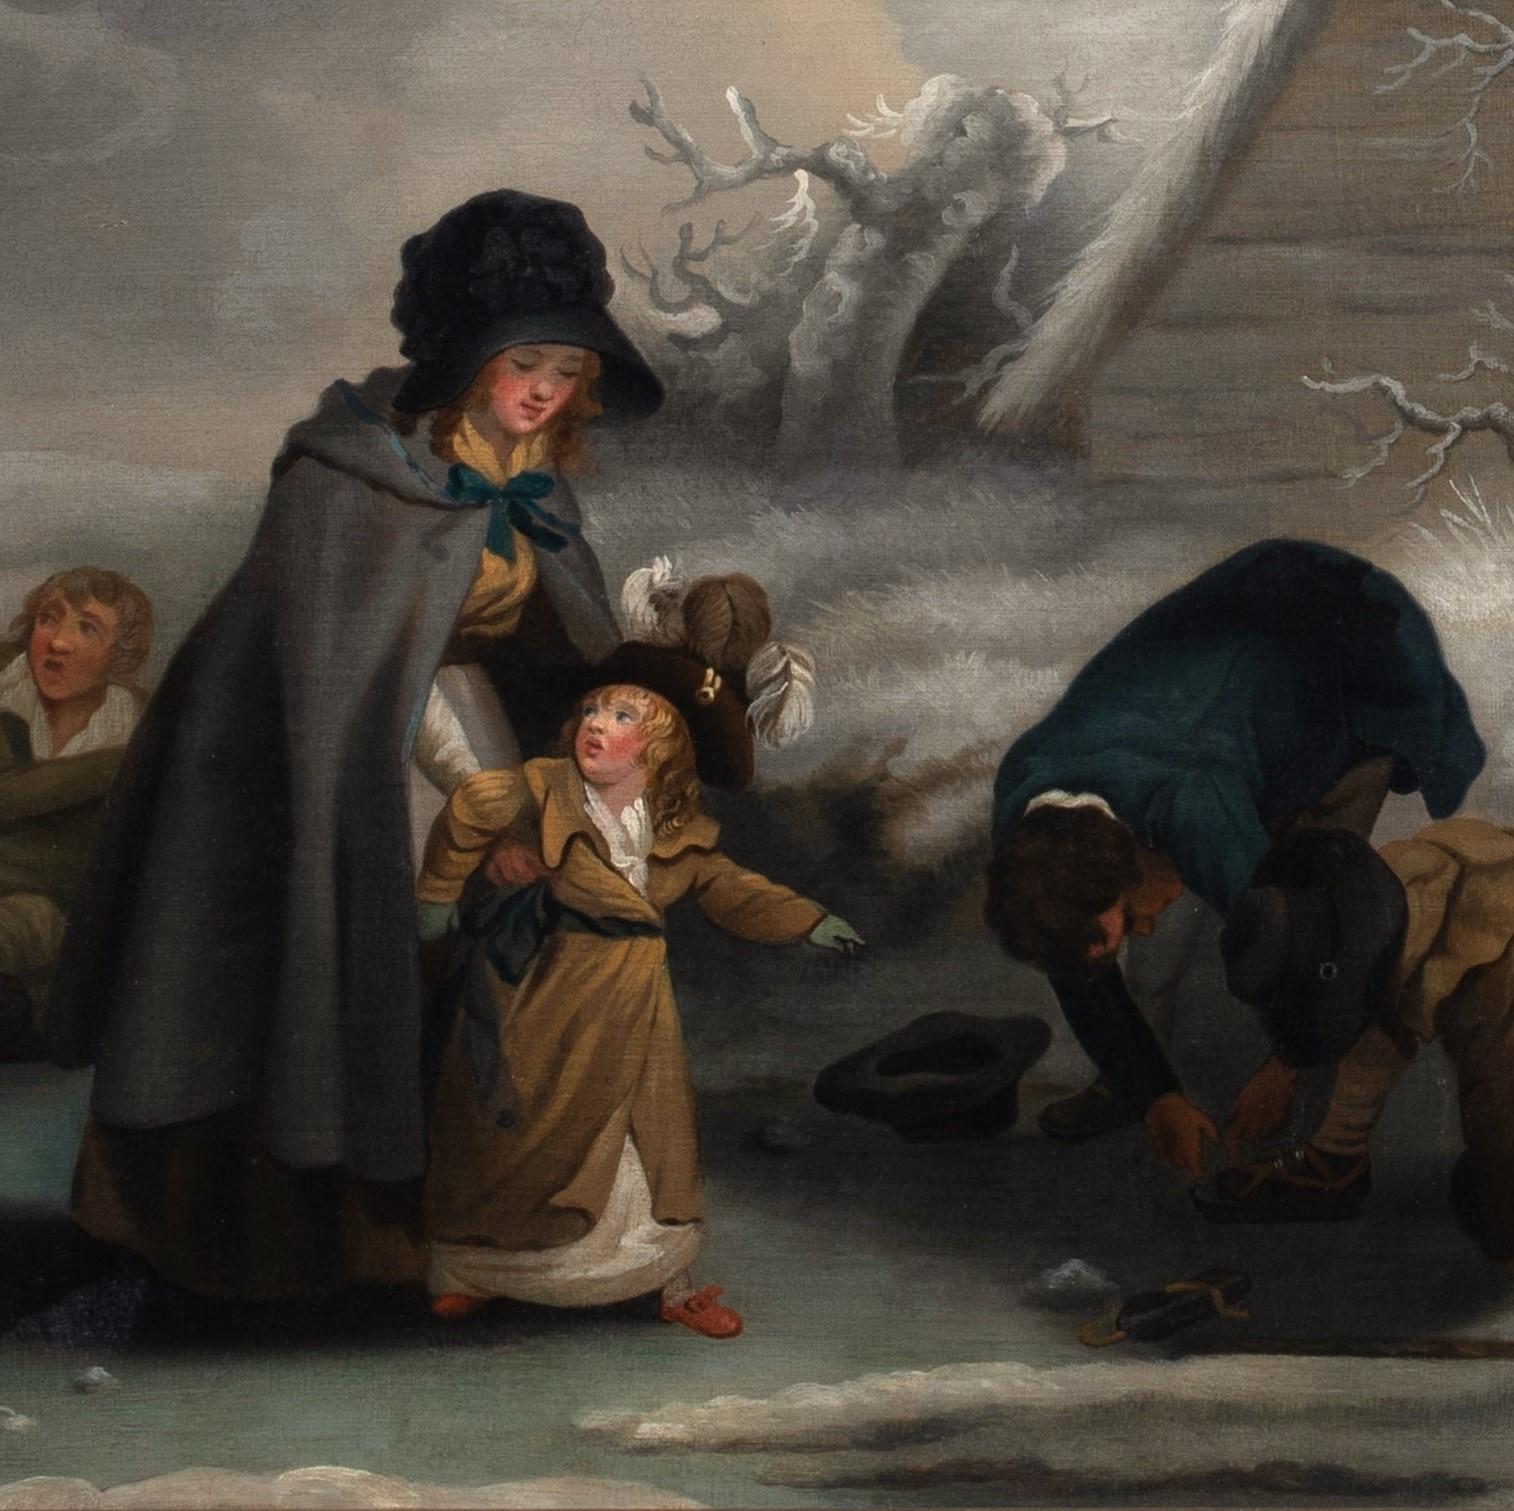 Ice Skating In A Winter Landscape, 18th Century   3